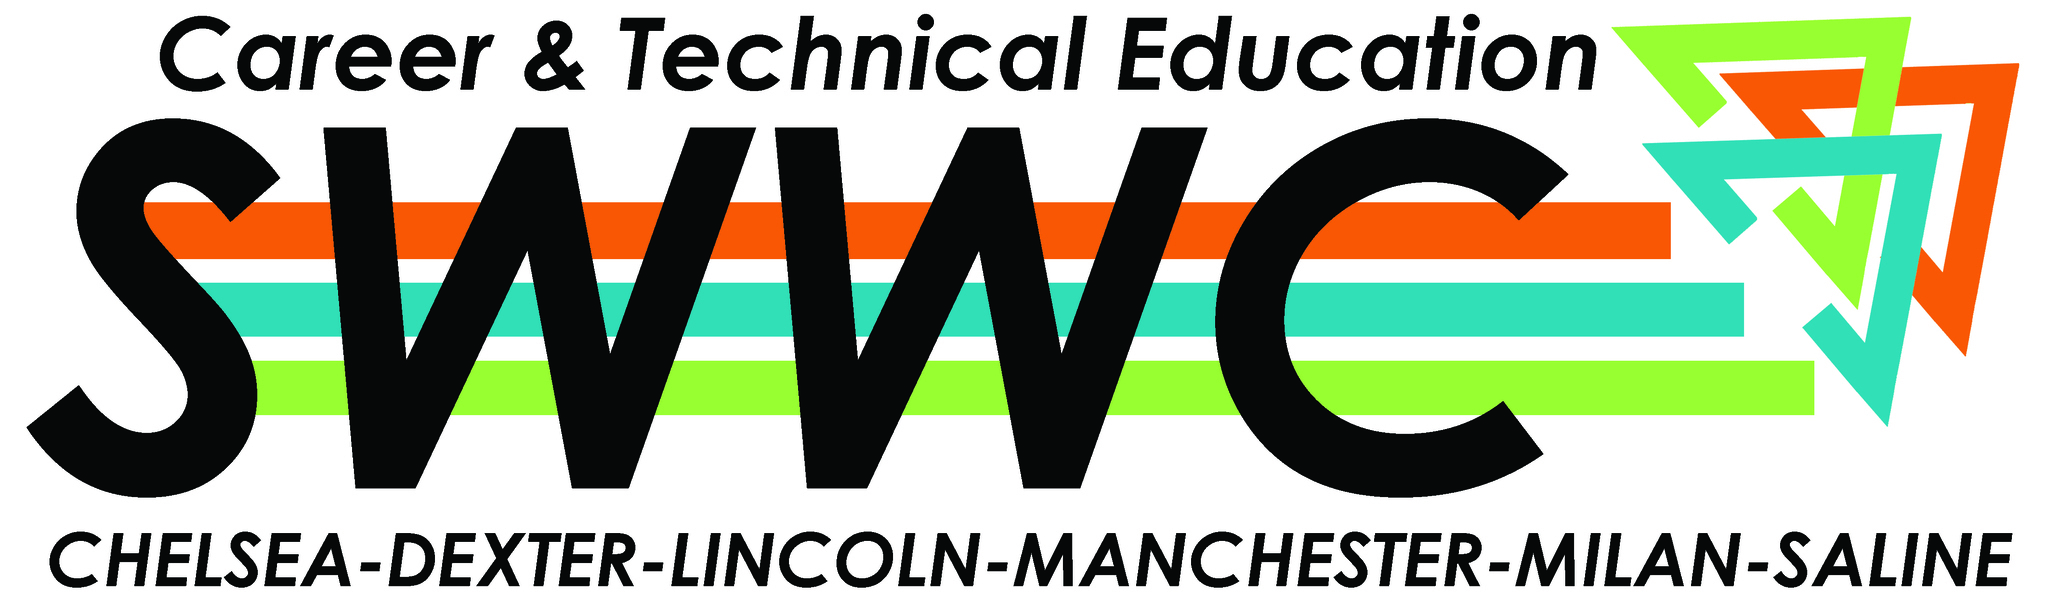 Career & Technical Education SWWC